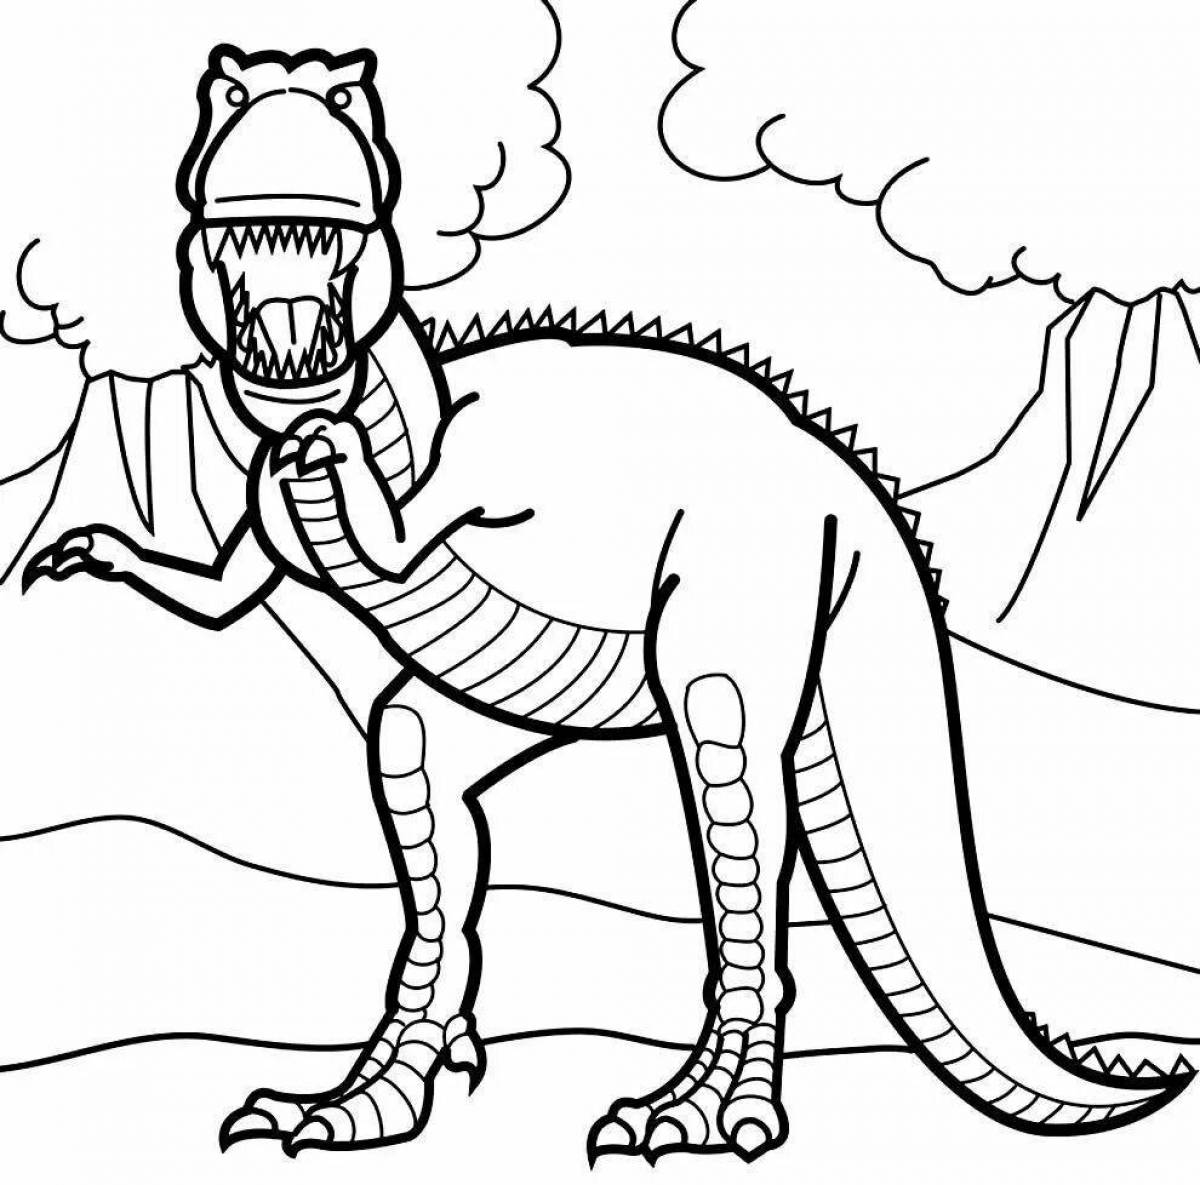 Amazing dinosaur coloring pages for boys 5-7 years old